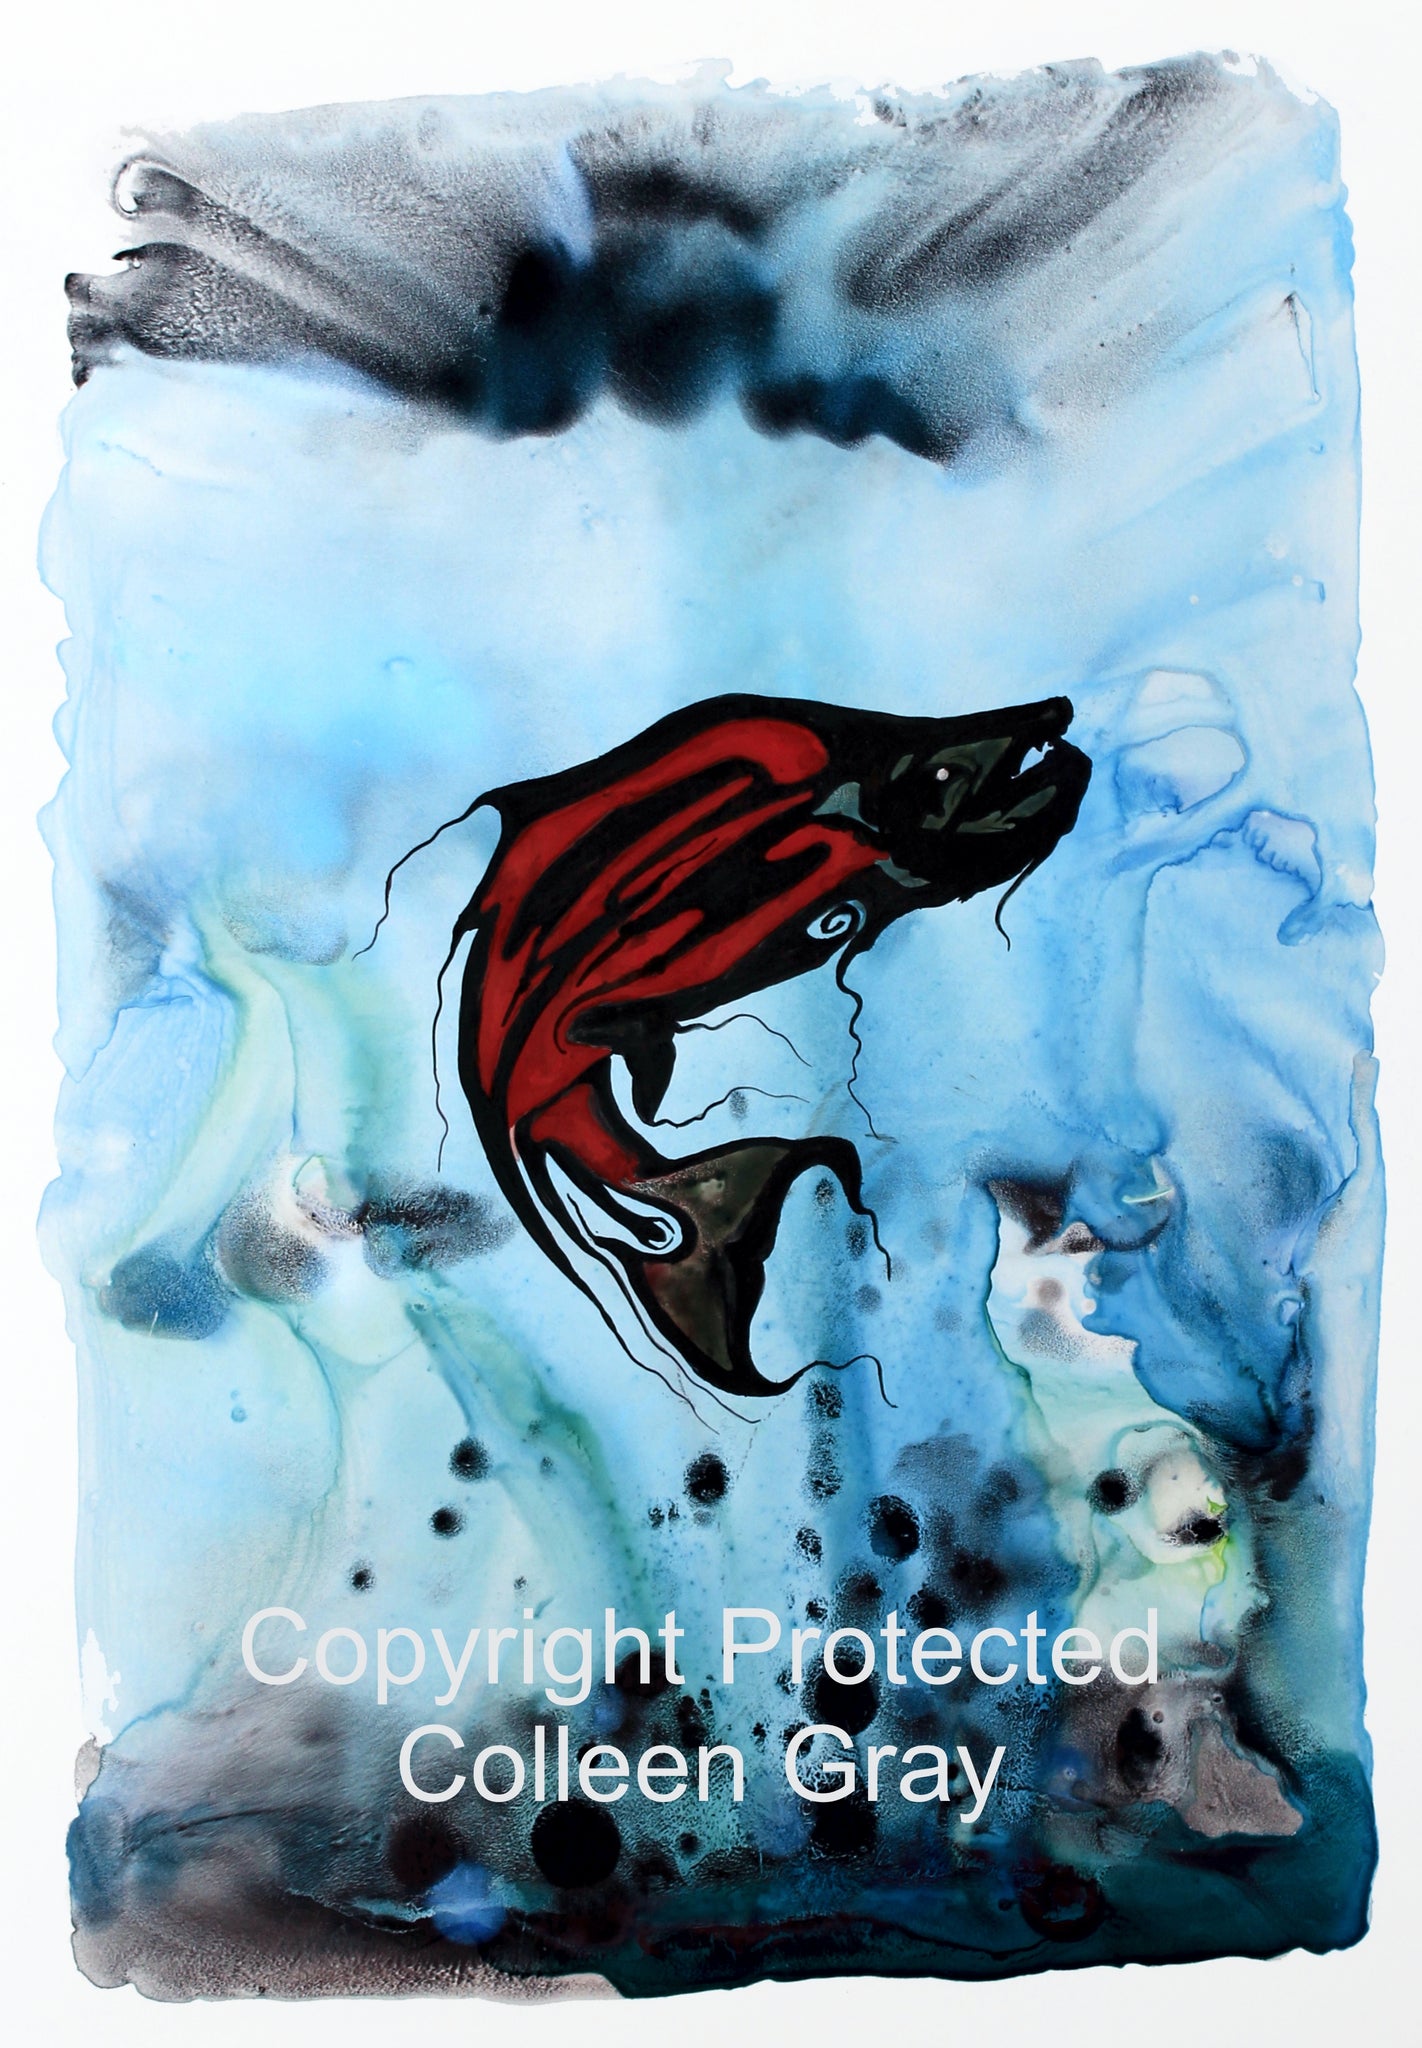 Image of Title: Salmon Oil 16x20 archival print by Metis Artist Colleen Gray Indigenous Canadian Art Work. Vertical, red salmon swimming in the blue water. For sale at https://artforaidshop.ca